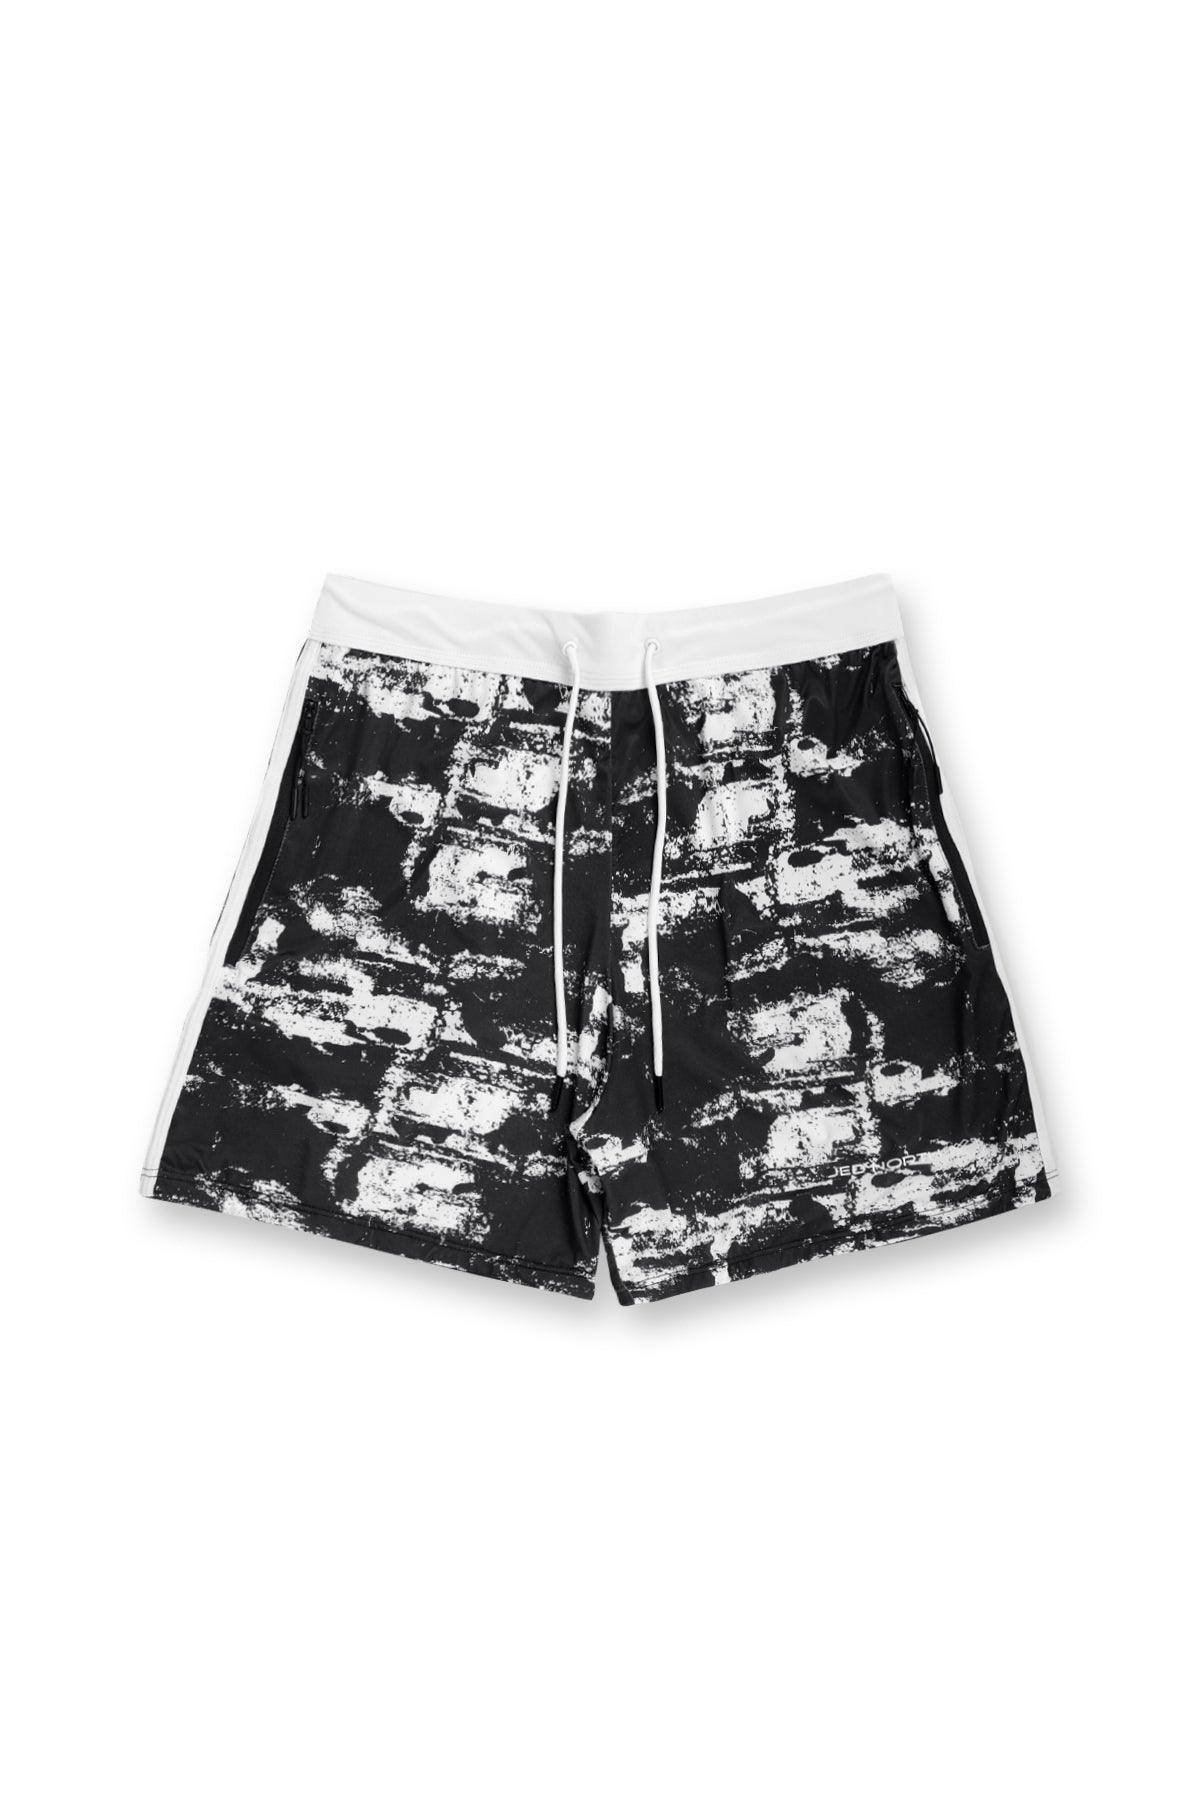 Ace Graphic Casual 5" Shorts 2.0 - Black Brush - Jed North Canada